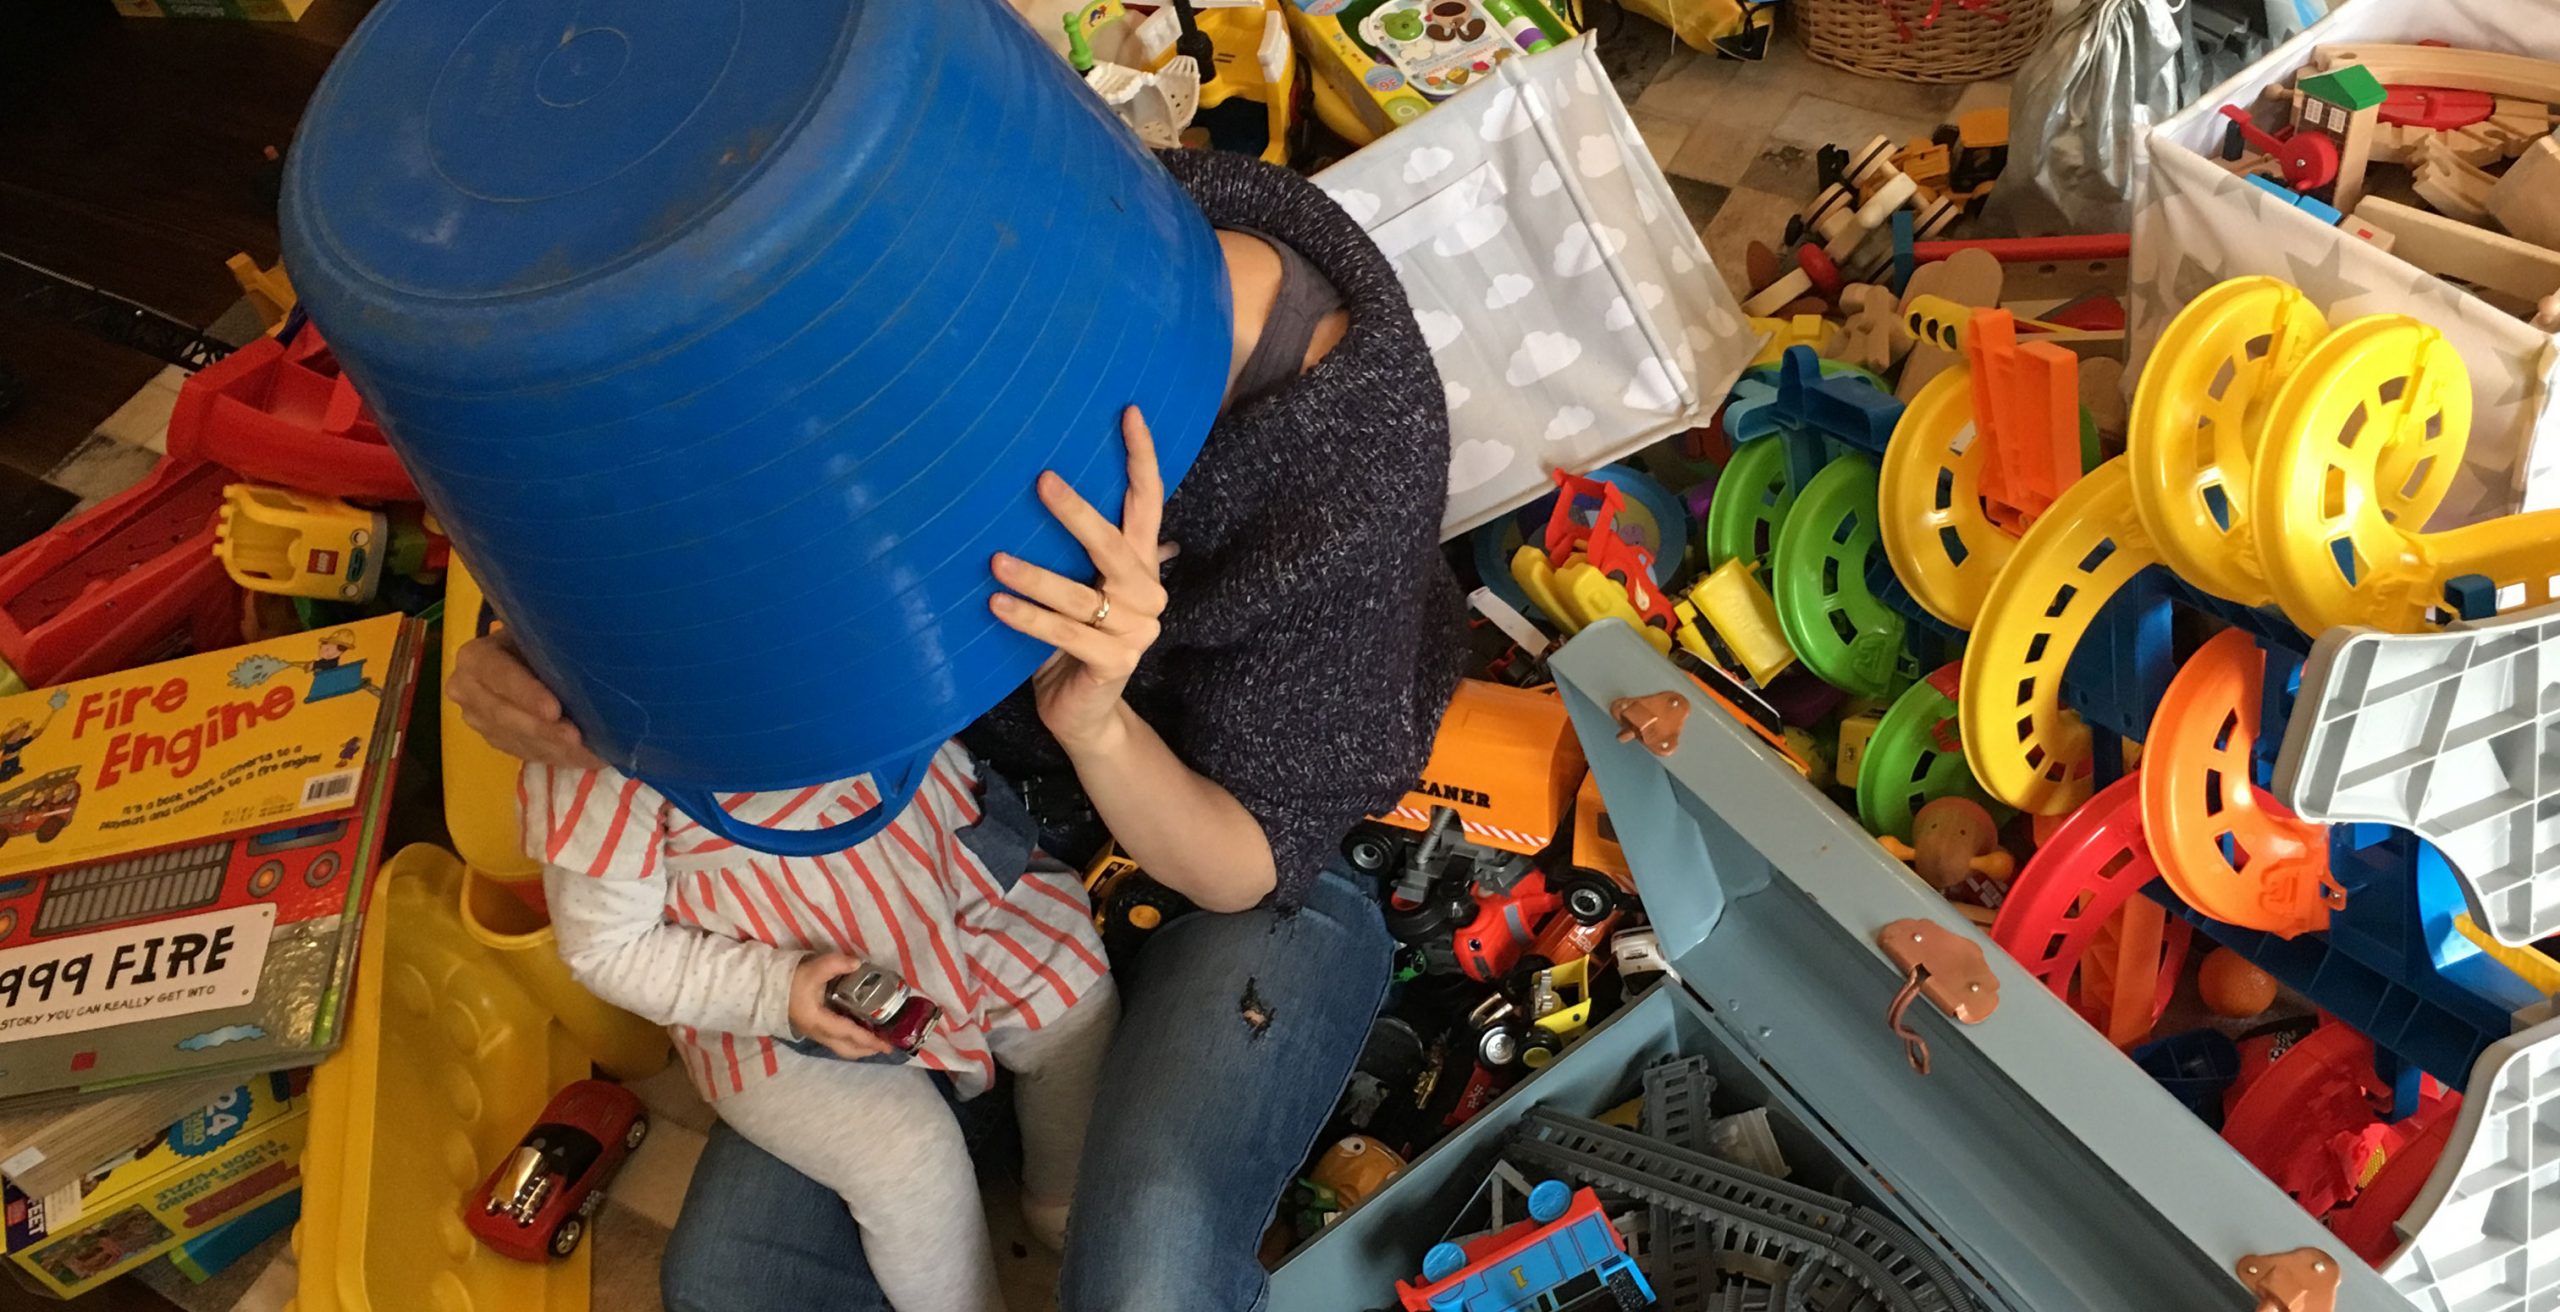 Exhausted mother with a young child sitting amongst a mess of toys